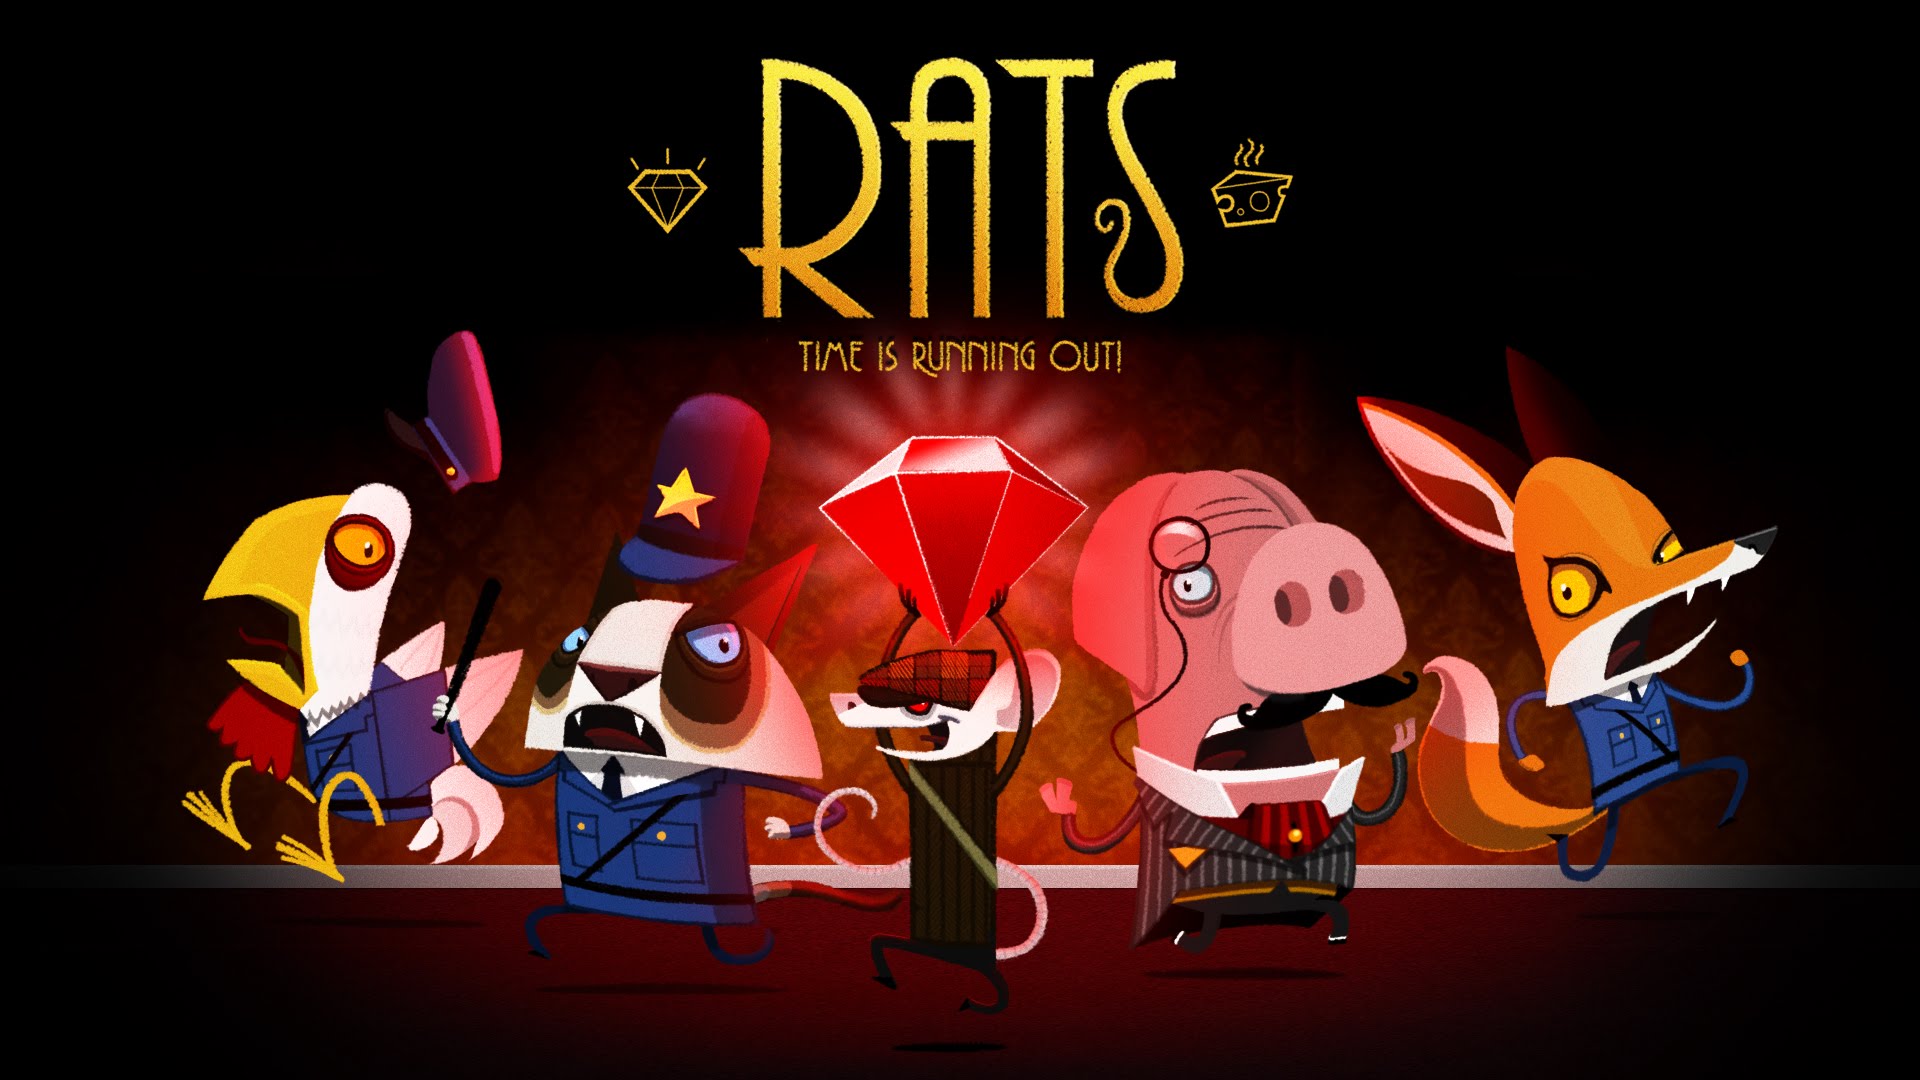 HD Quality Wallpaper | Collection: Video Game, 1920x1080 Rats - Time Is Running Out!